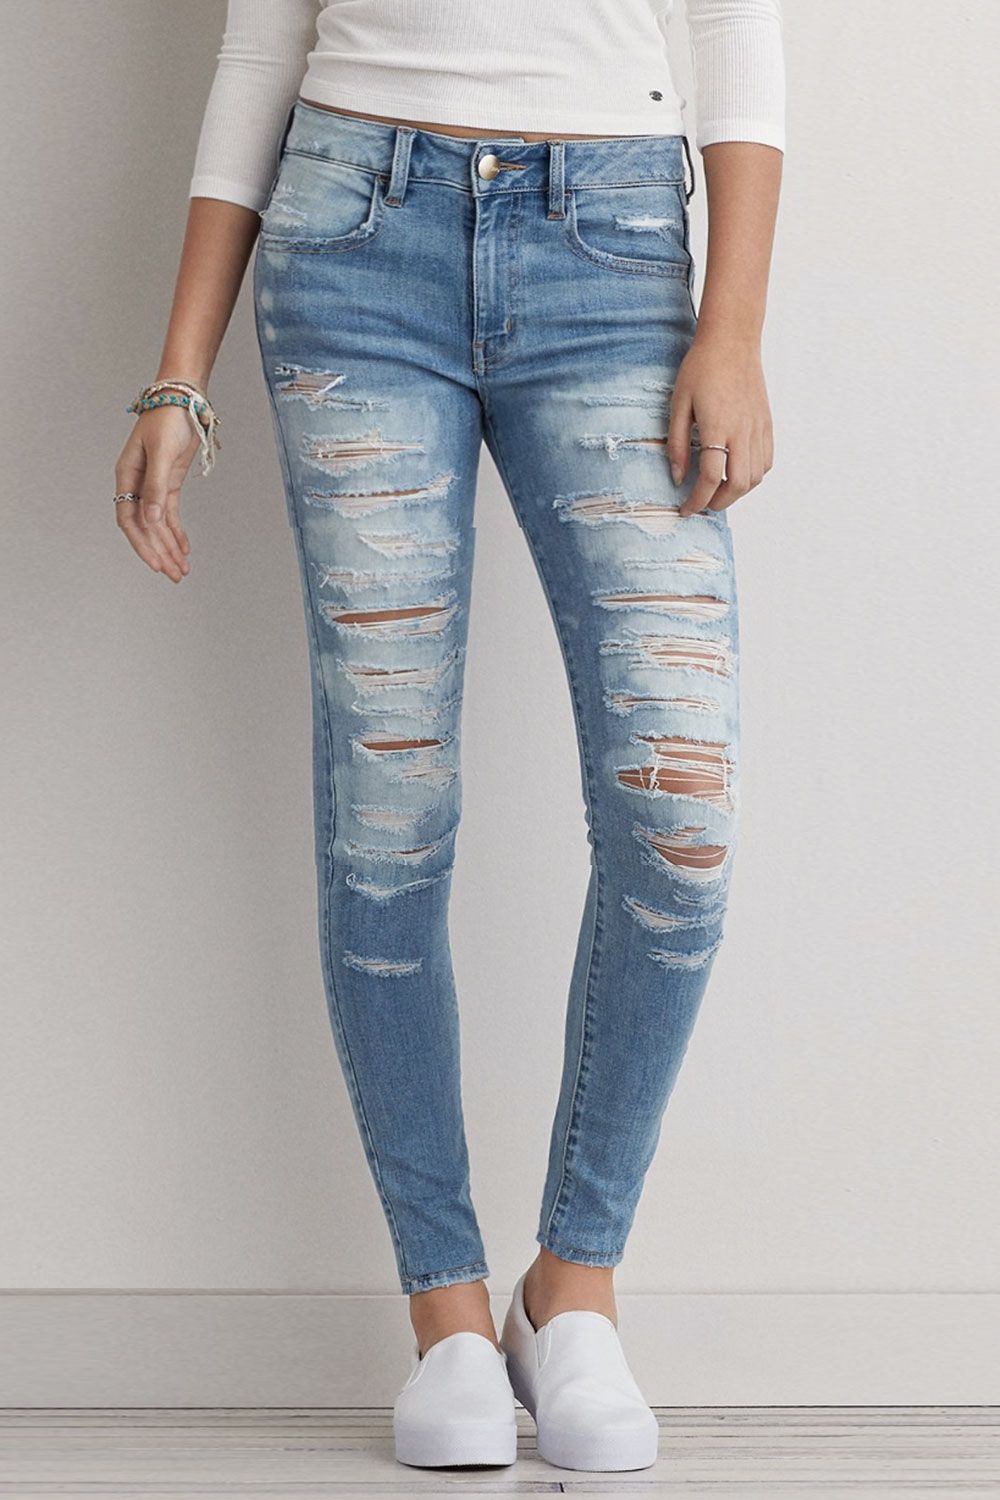 ridiculously ripped jeans